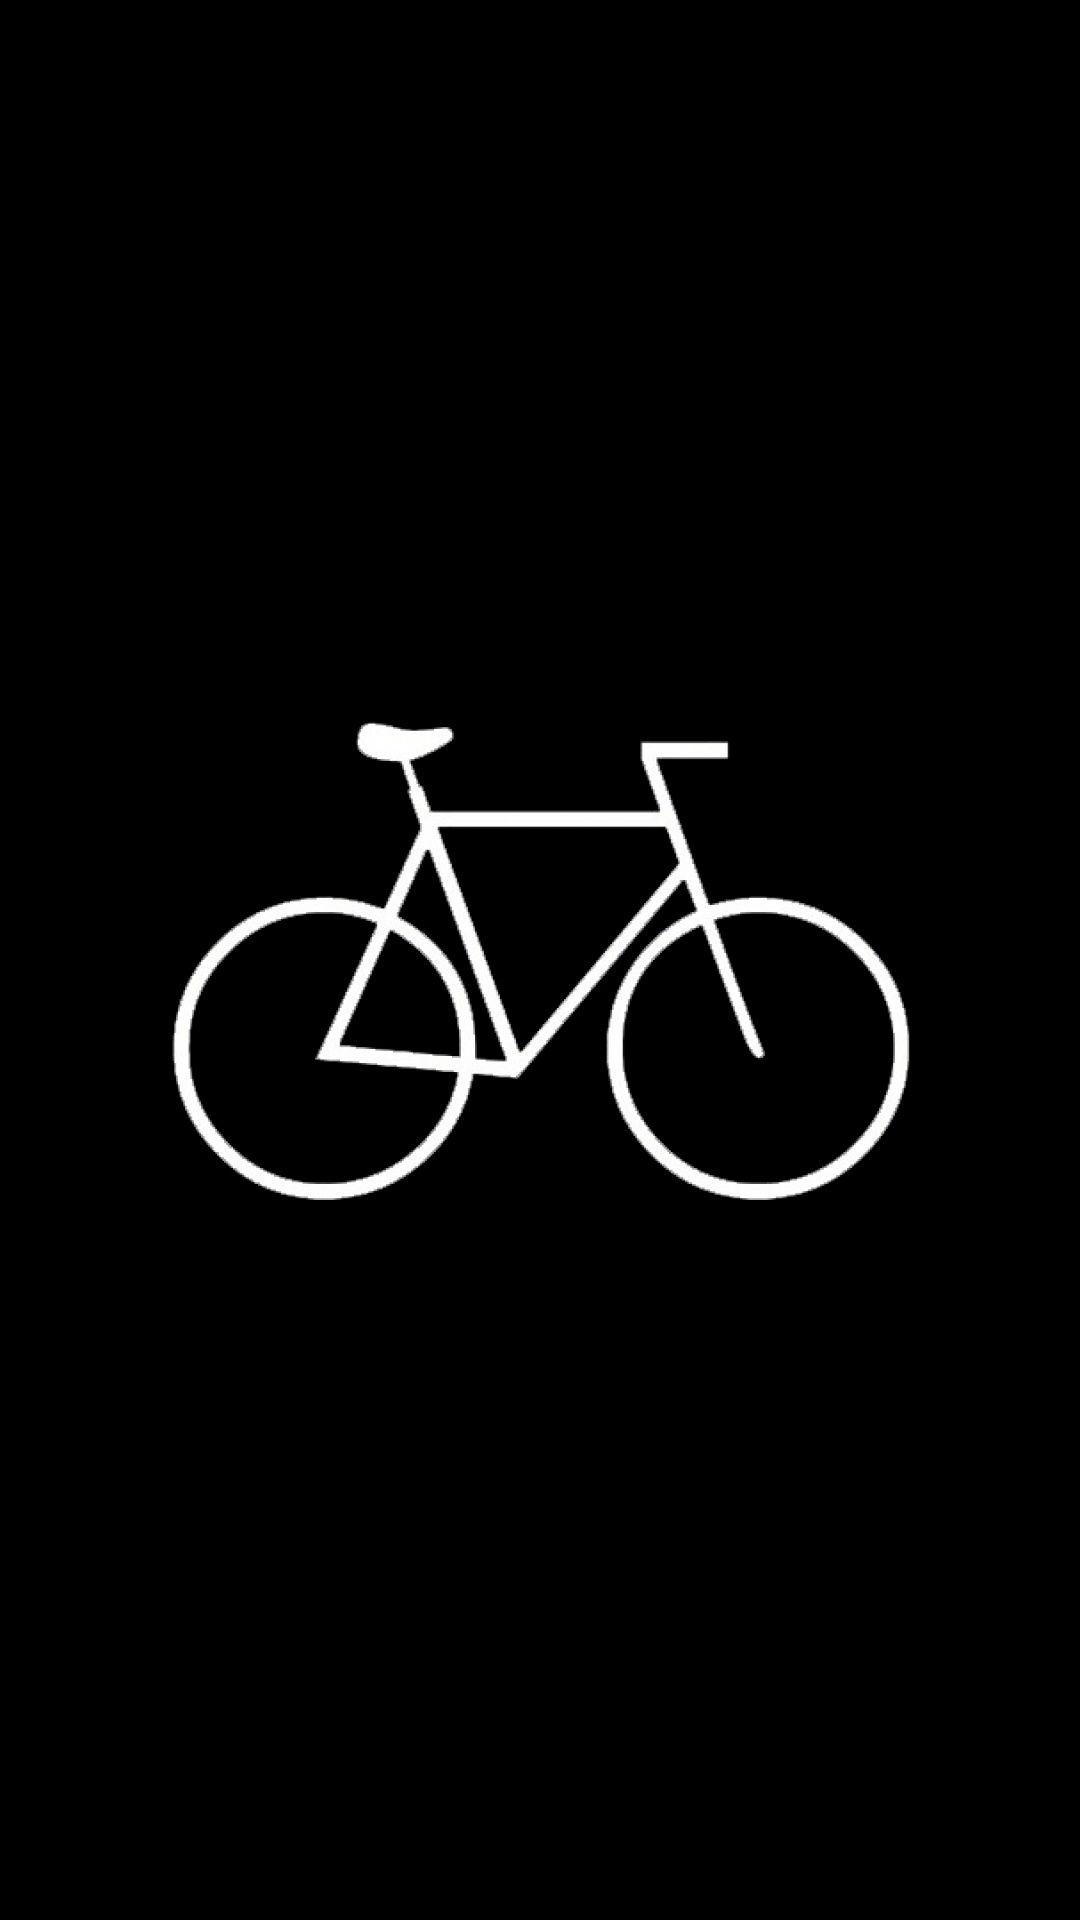 Hipster Bicycle Dark Flat Android Wallpaper free download